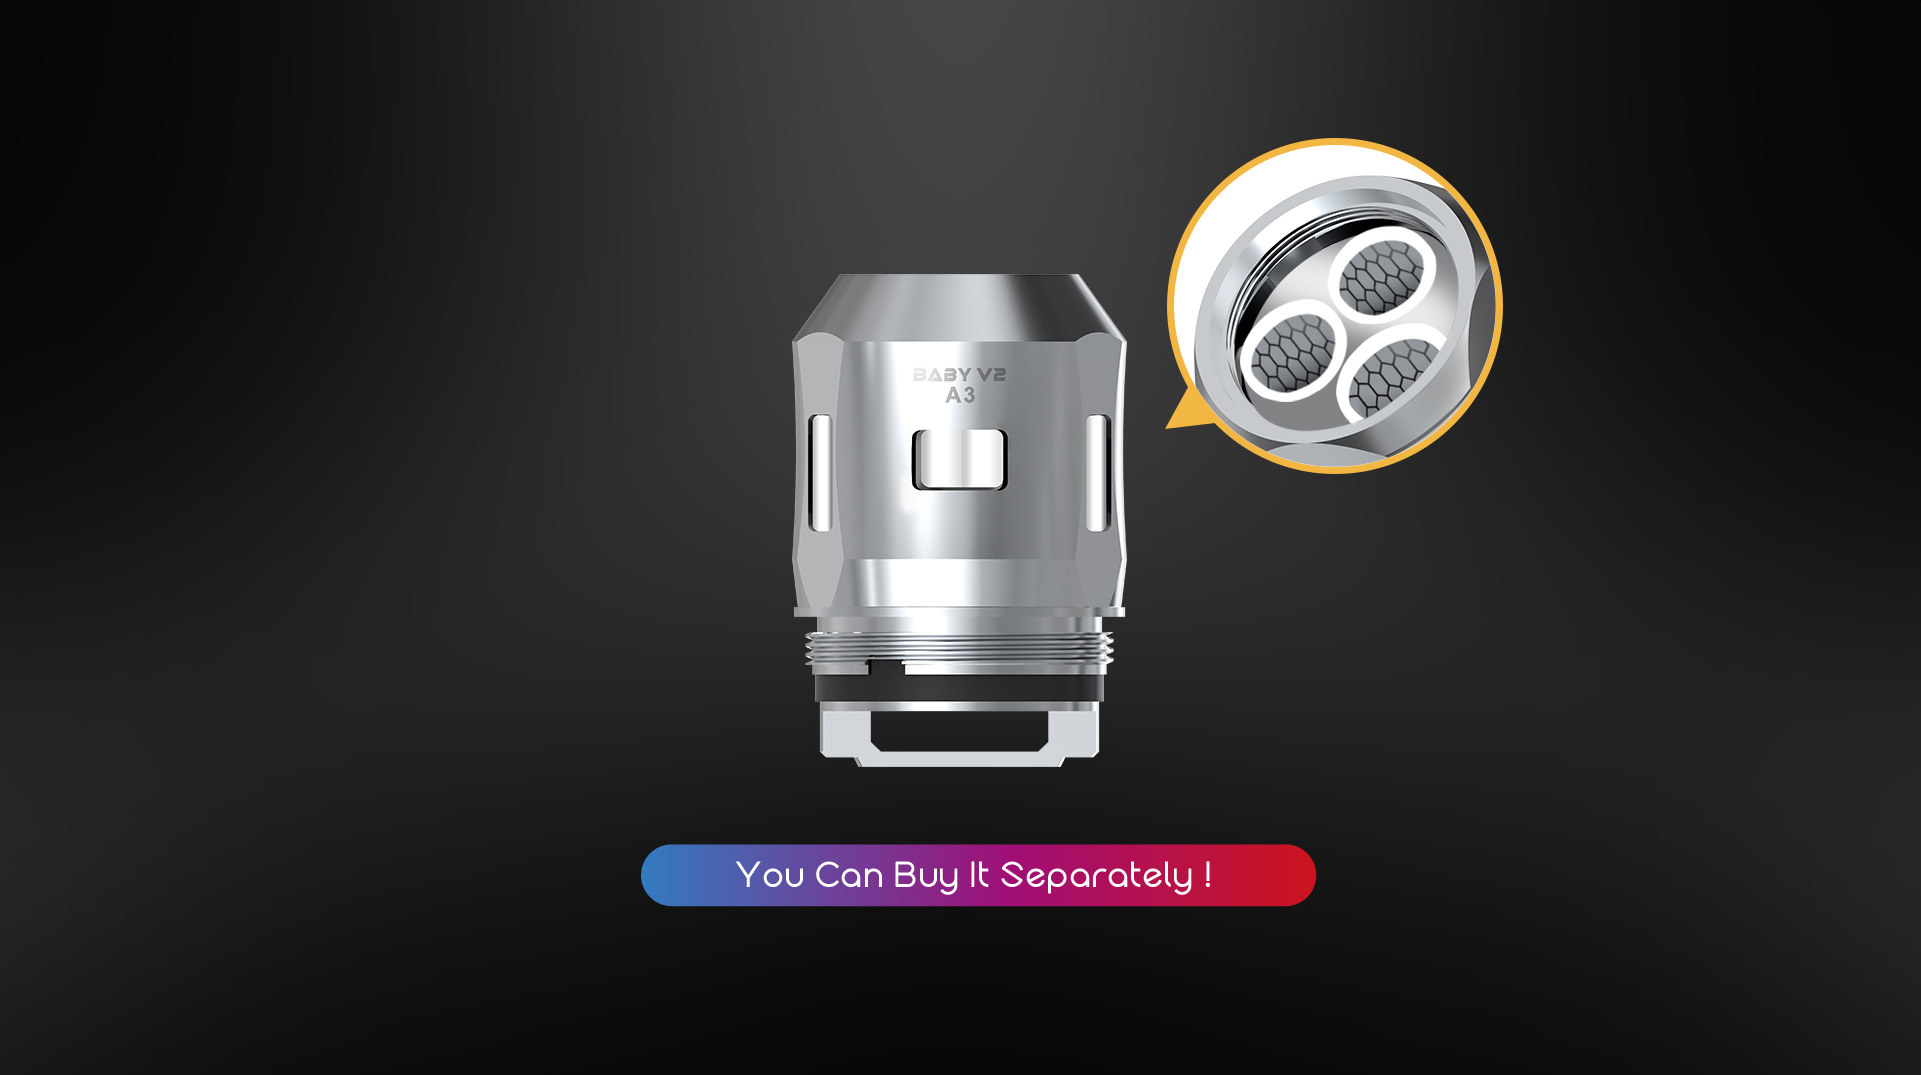 Baby V2 A3 Coil for SMOK Species Kit